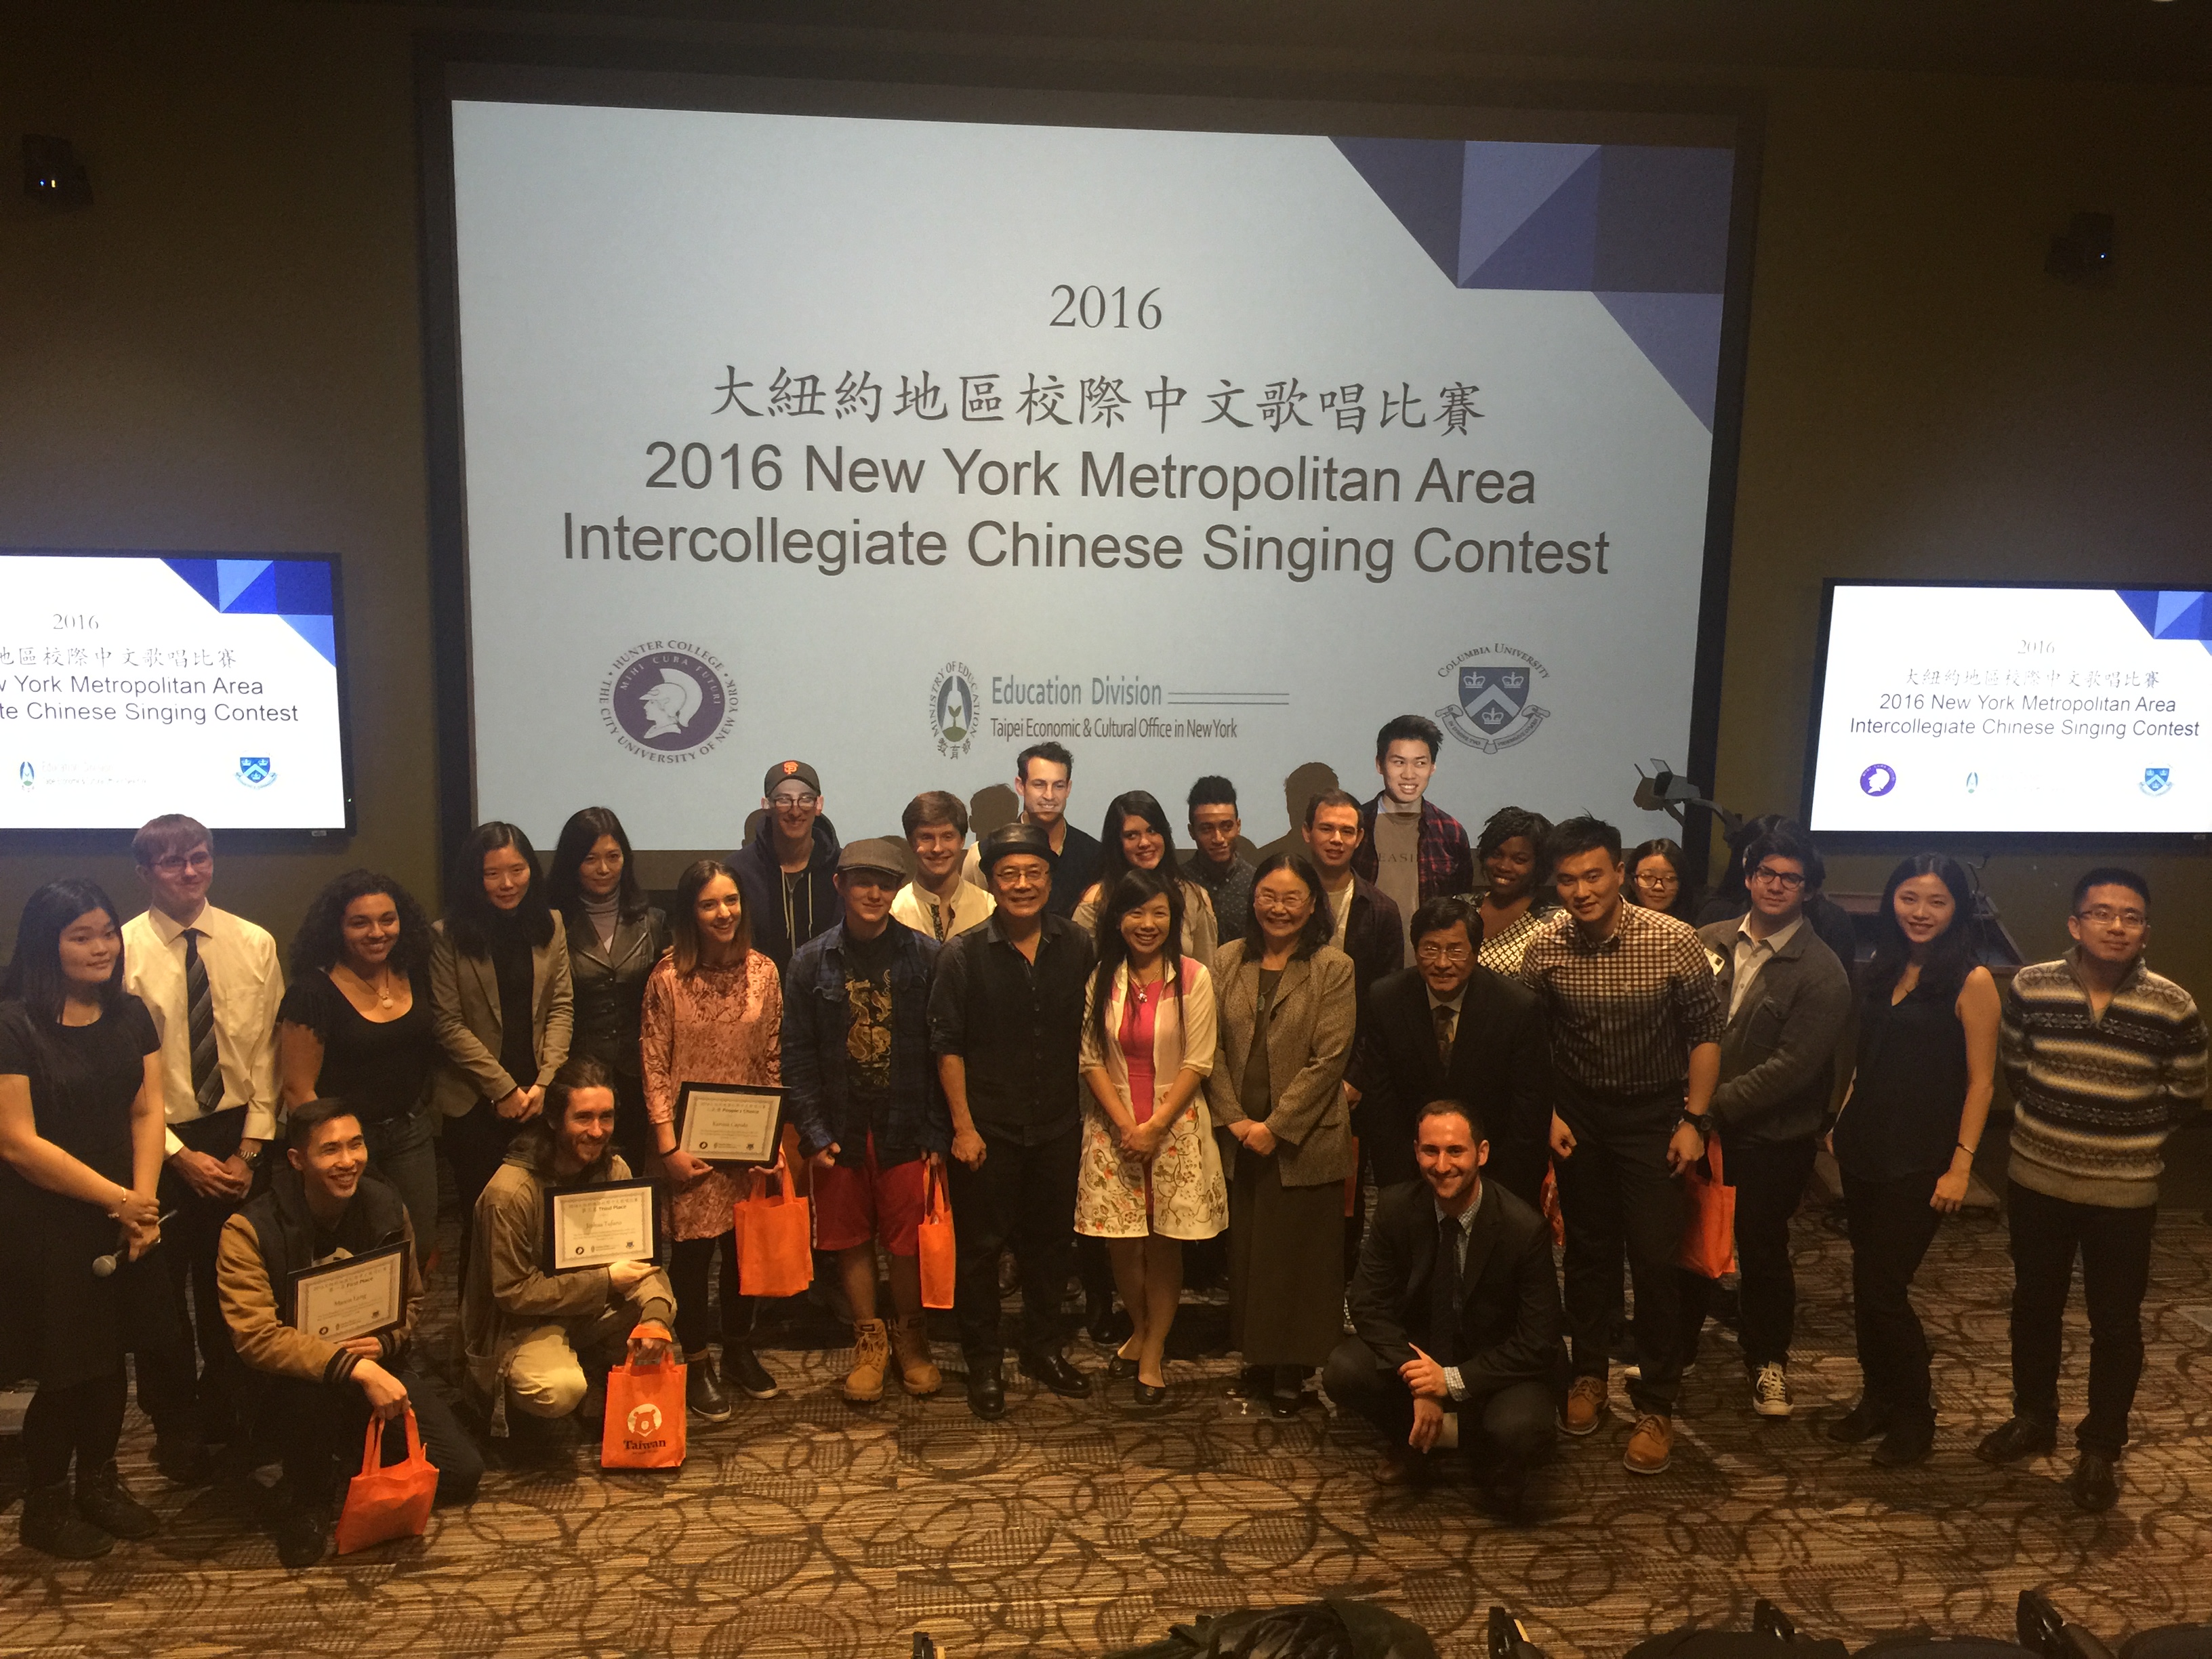 NY Education Division organizes first New York Metropolitan Area Intercollegiate Chinese Singing Contest